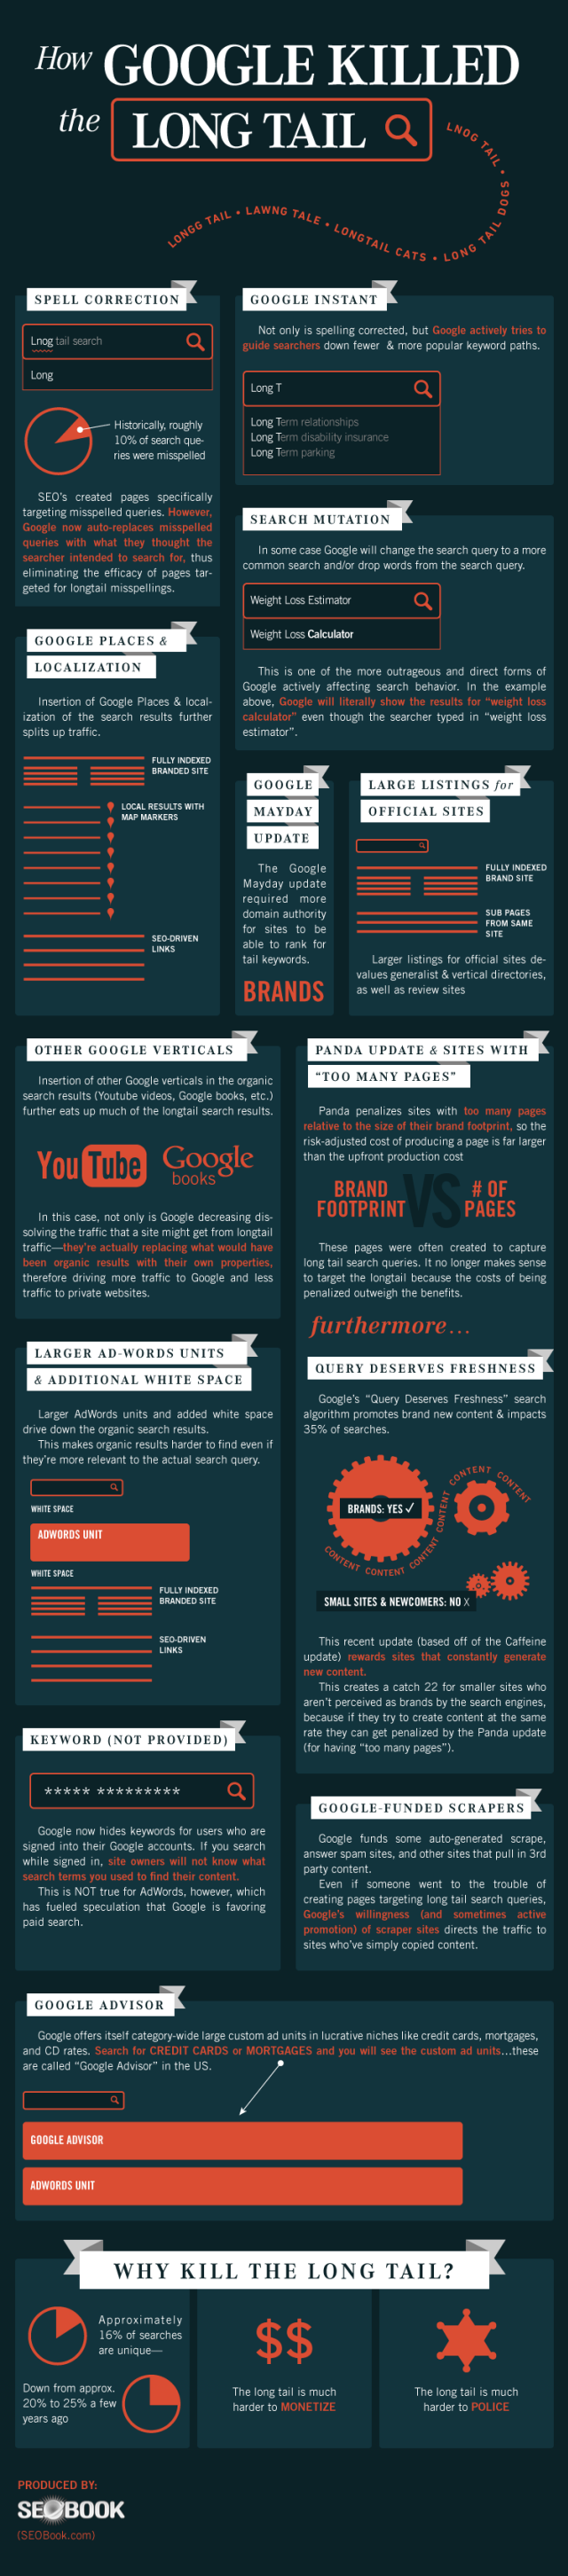 How Google Killed the Longtail Infographic.